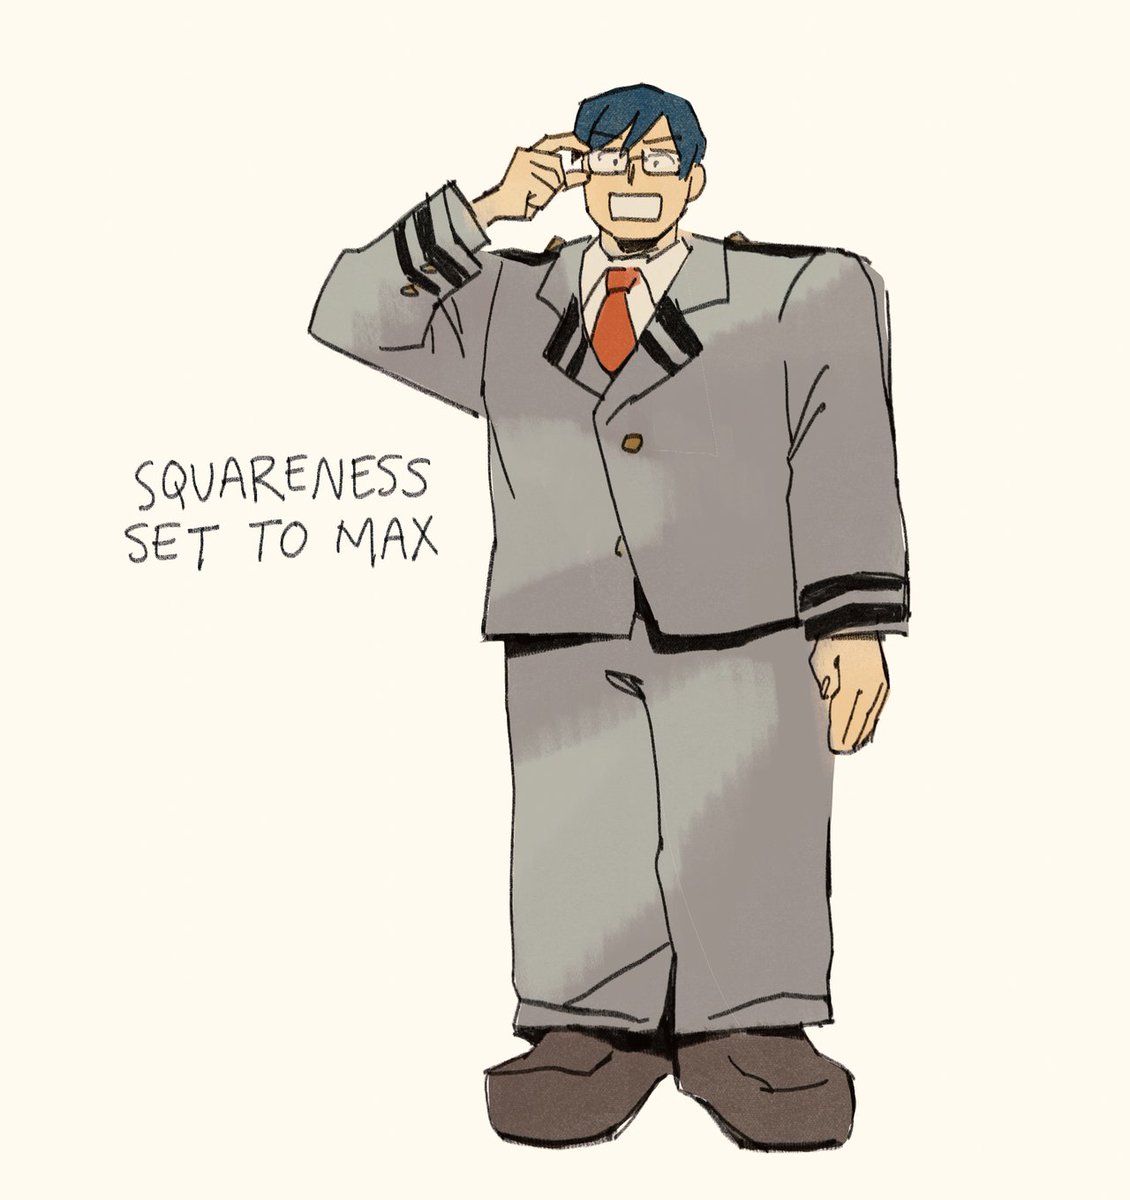 normal well-adjusted people: hoho square iida funny
me: hoho square iida funny i'm gonna spend several hours drawing this 